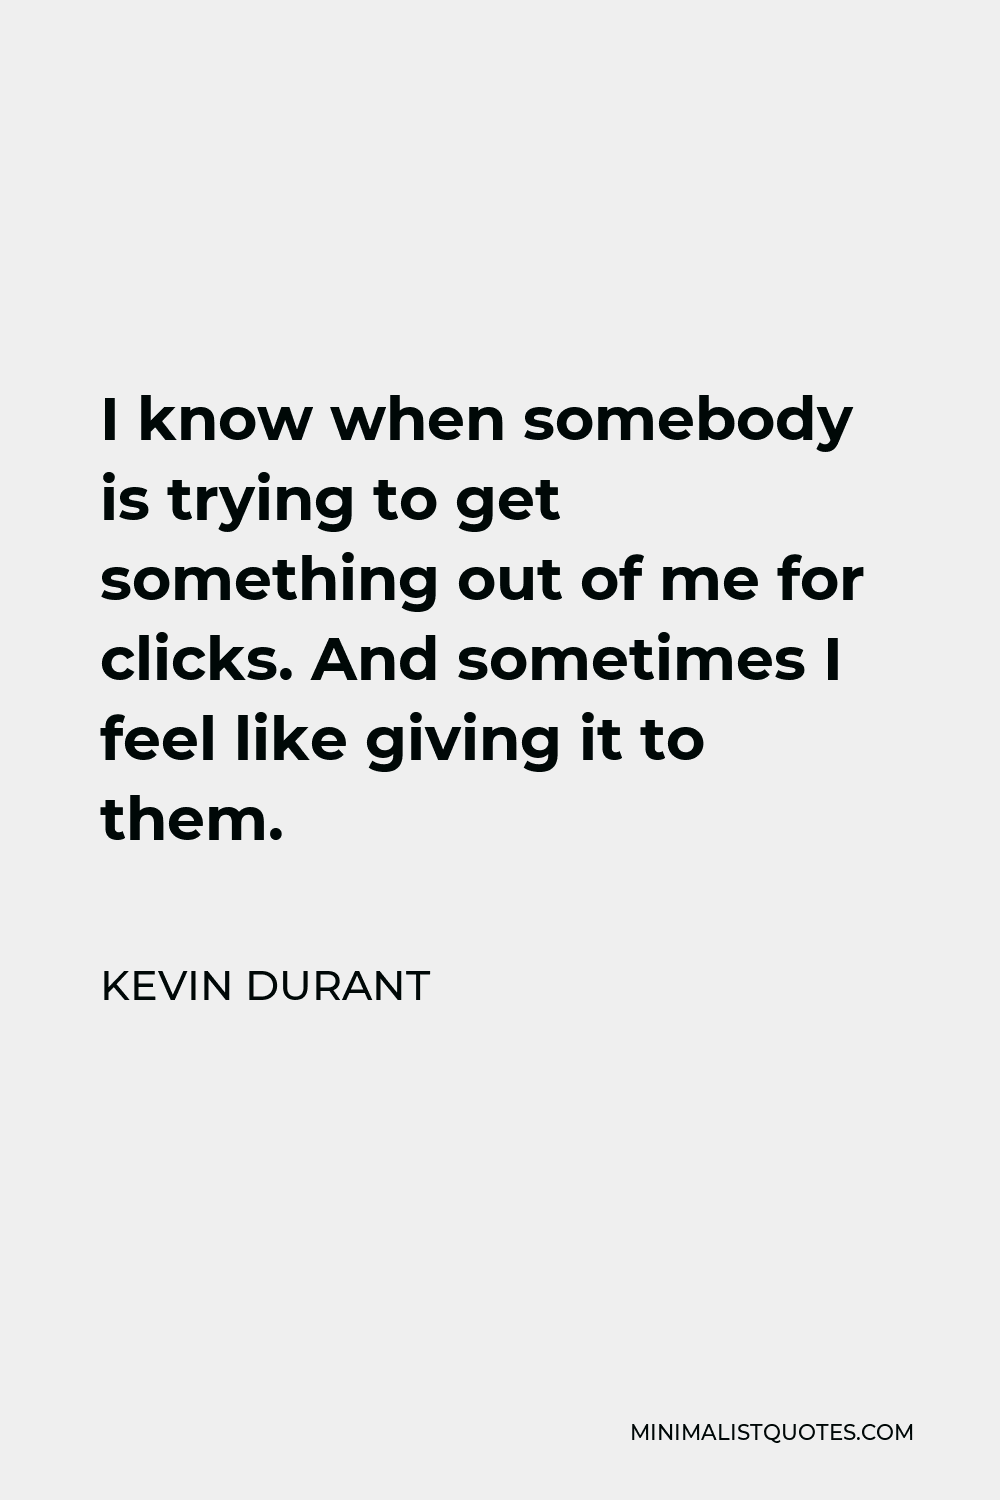 Kevin Durant Quote - I know when somebody is trying to get something out of me for clicks. And sometimes I feel like giving it to them.